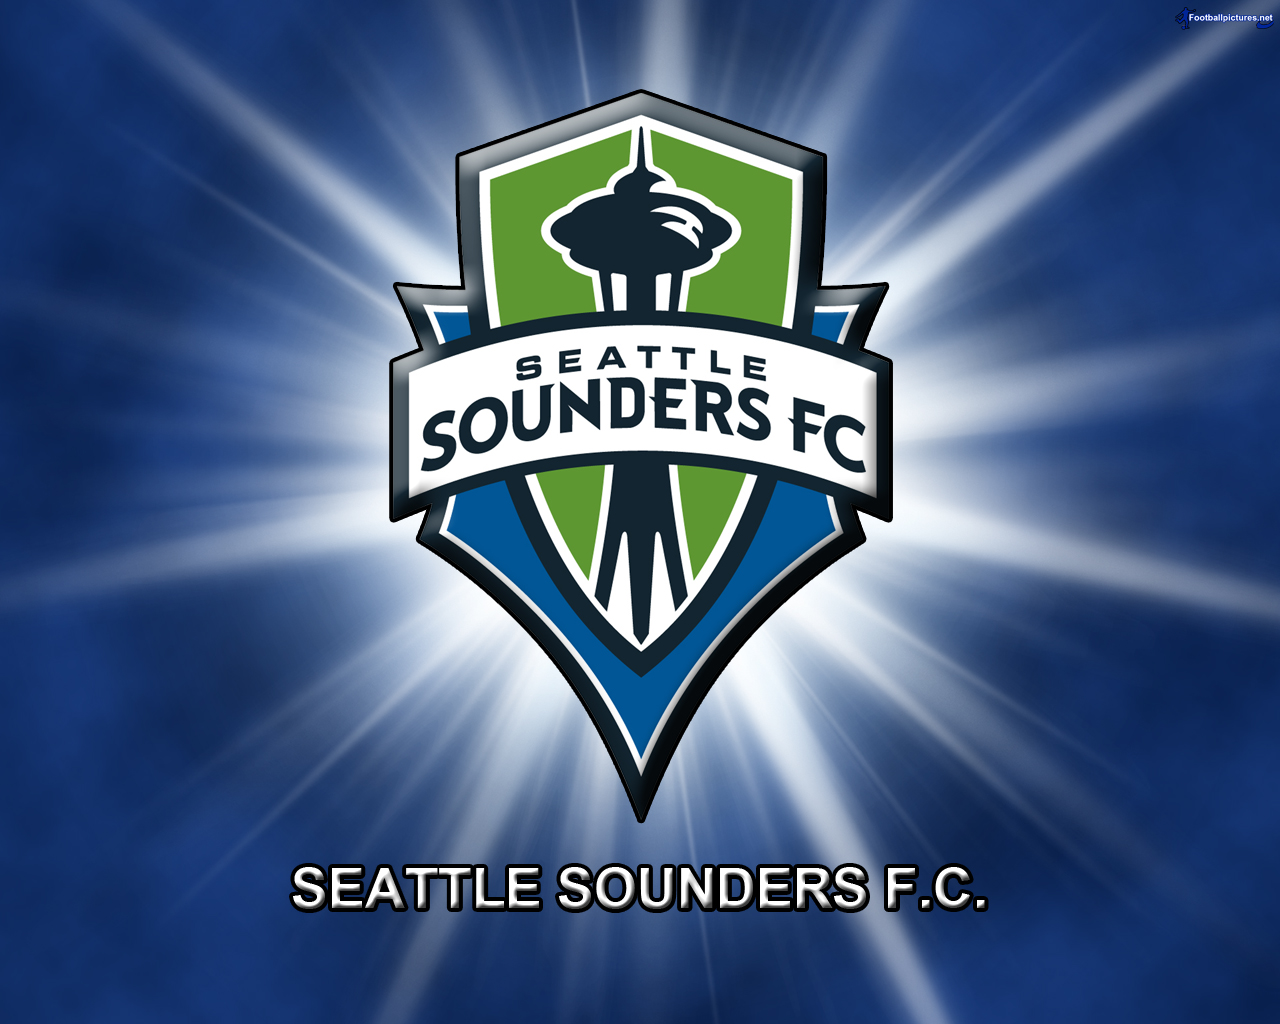 Seattle sounders fc 2012 1280x1024 wallpaper, Football Pictures